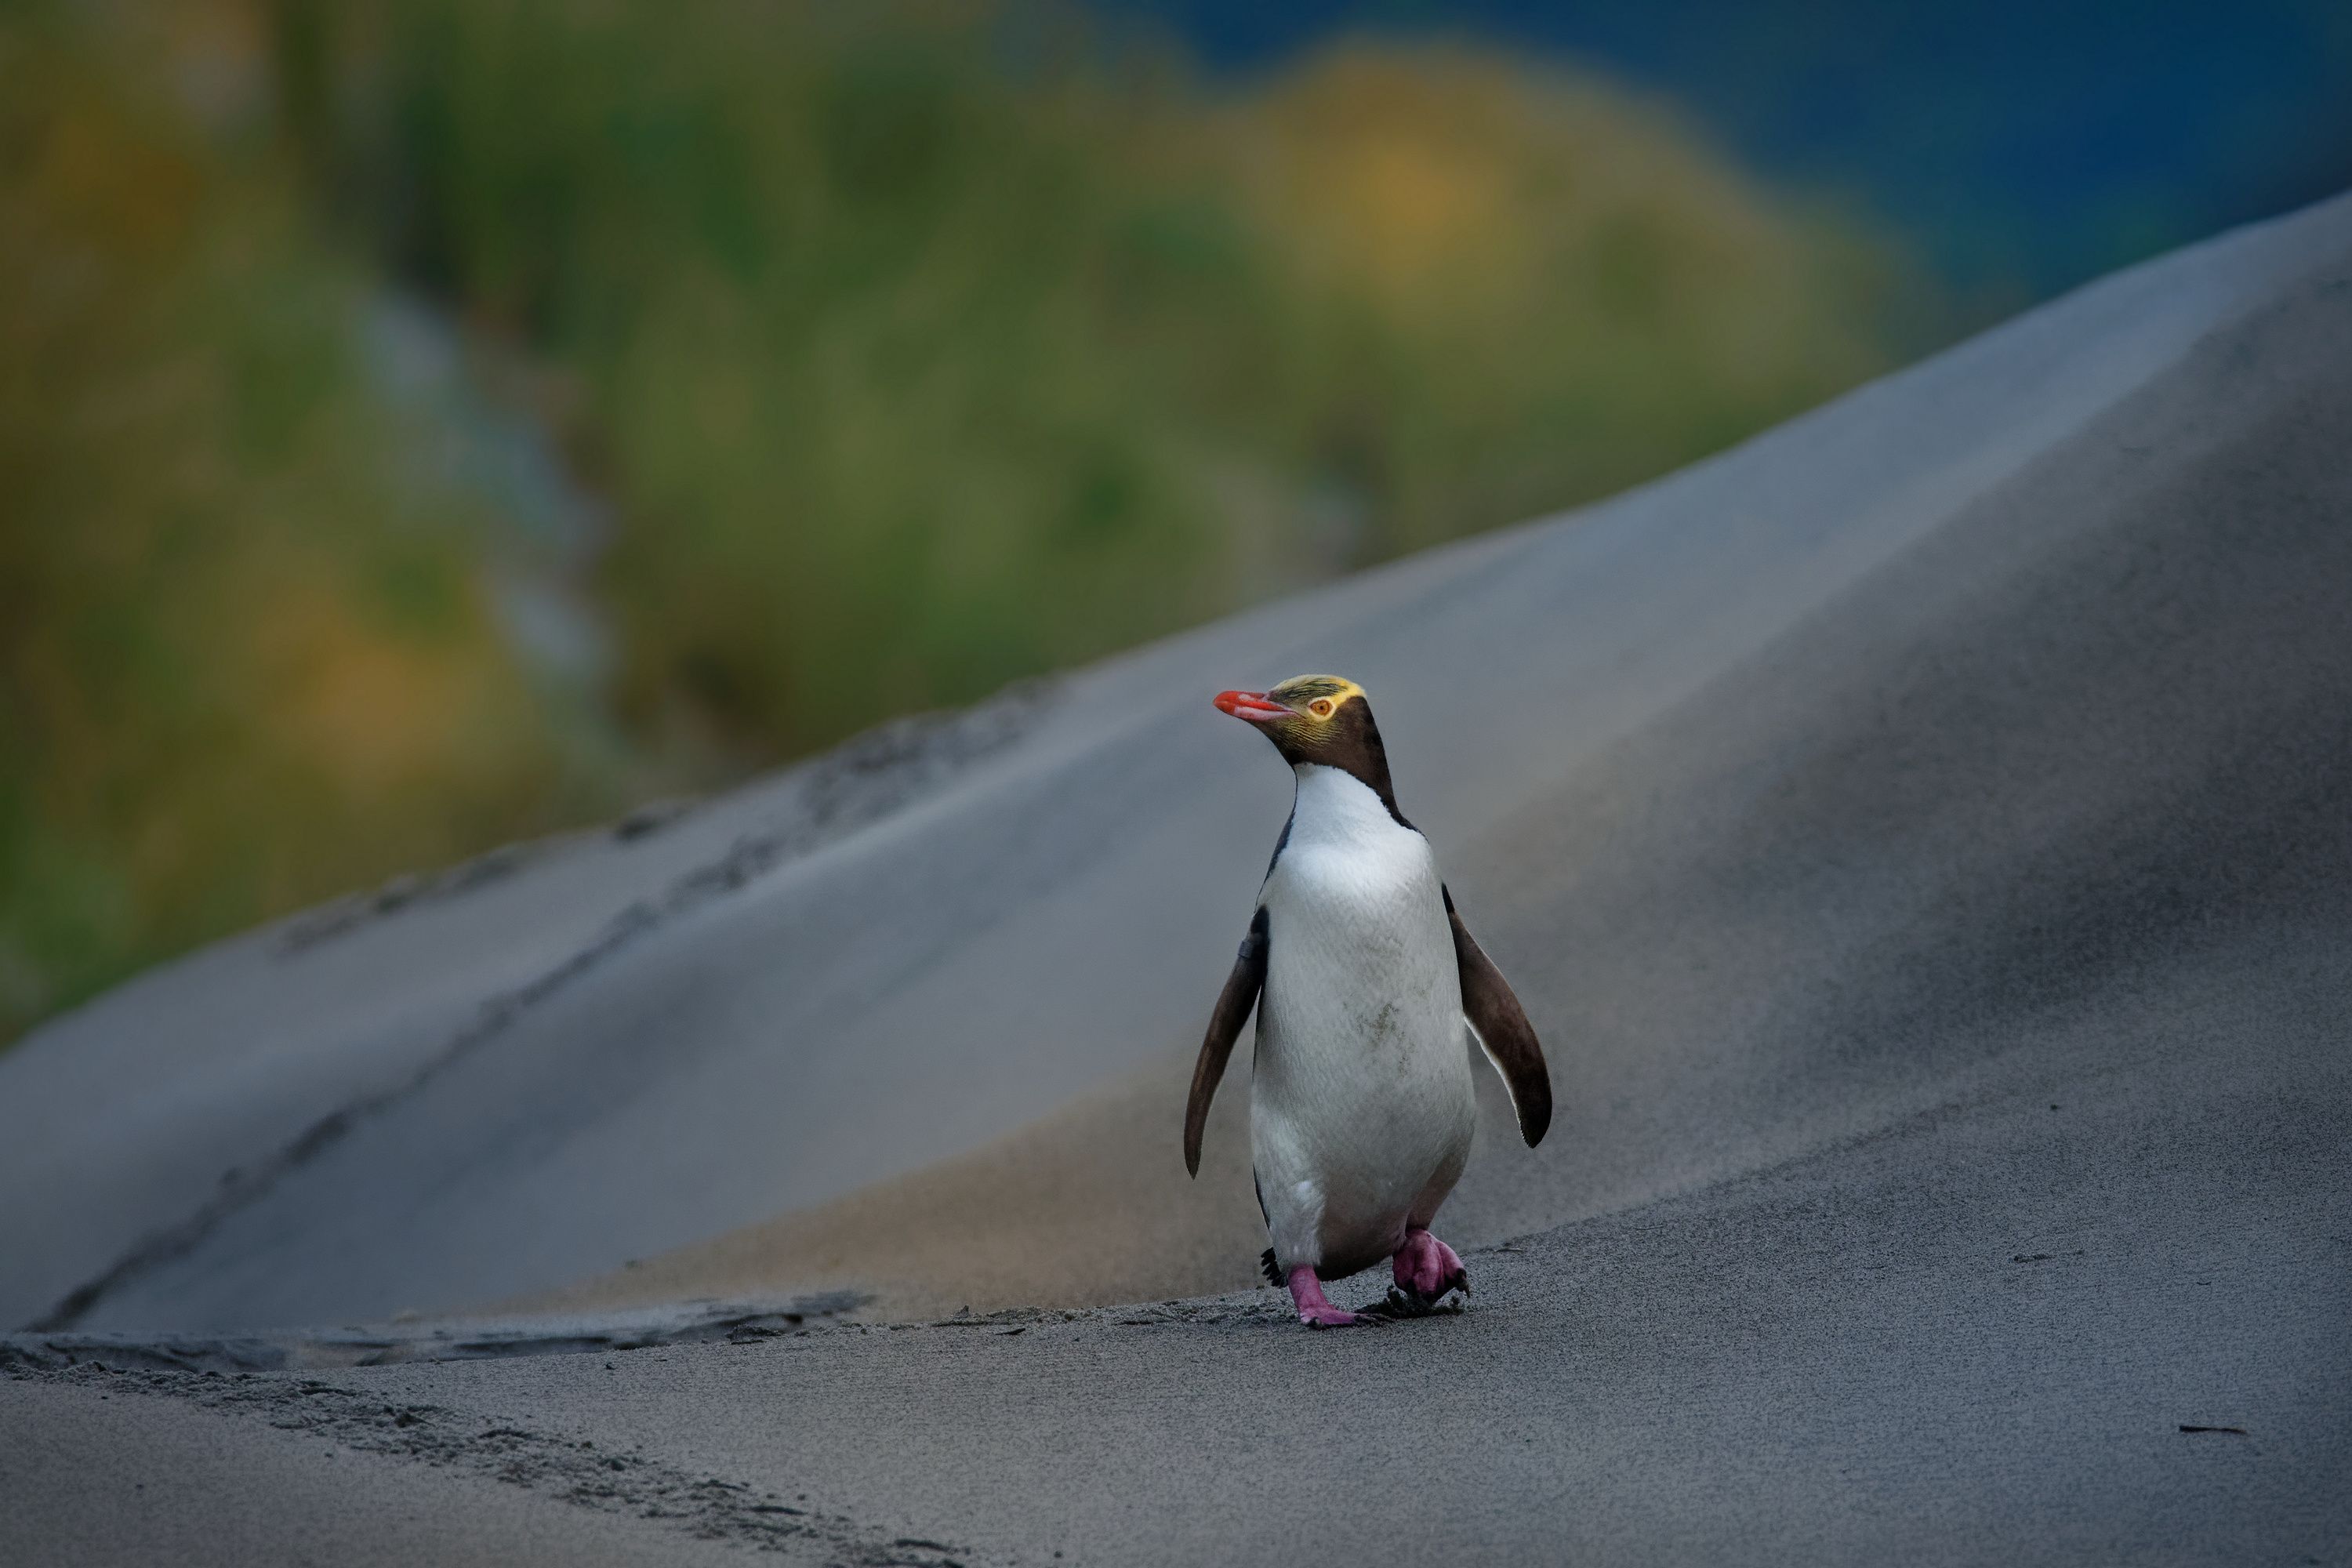 The world's only solitary species of penguin, hoiho are found only in New Zealand's south island and its sub-antarctic islands. It is estimated that just <a href="index.php?page=&url=https%3A%2F%2Fwww.iucnredlist.org%2Fspecies%2F22697800%2F182703046" target="_blank" target="_blank">3,000 mature individuals</a> remain in the wild. On New Zealand's mainland, the colony comprised just <a href="index.php?page=&url=https%3A%2F%2Fwww.doc.govt.nz%2Fnature%2Fnative-animals%2Fbirds%2Fbirds-a-z%2Fpenguins%2Fyellow-eyed-penguin-hoiho%2F" target="_blank" target="_blank">265 breeding pairs</a> in 2019.